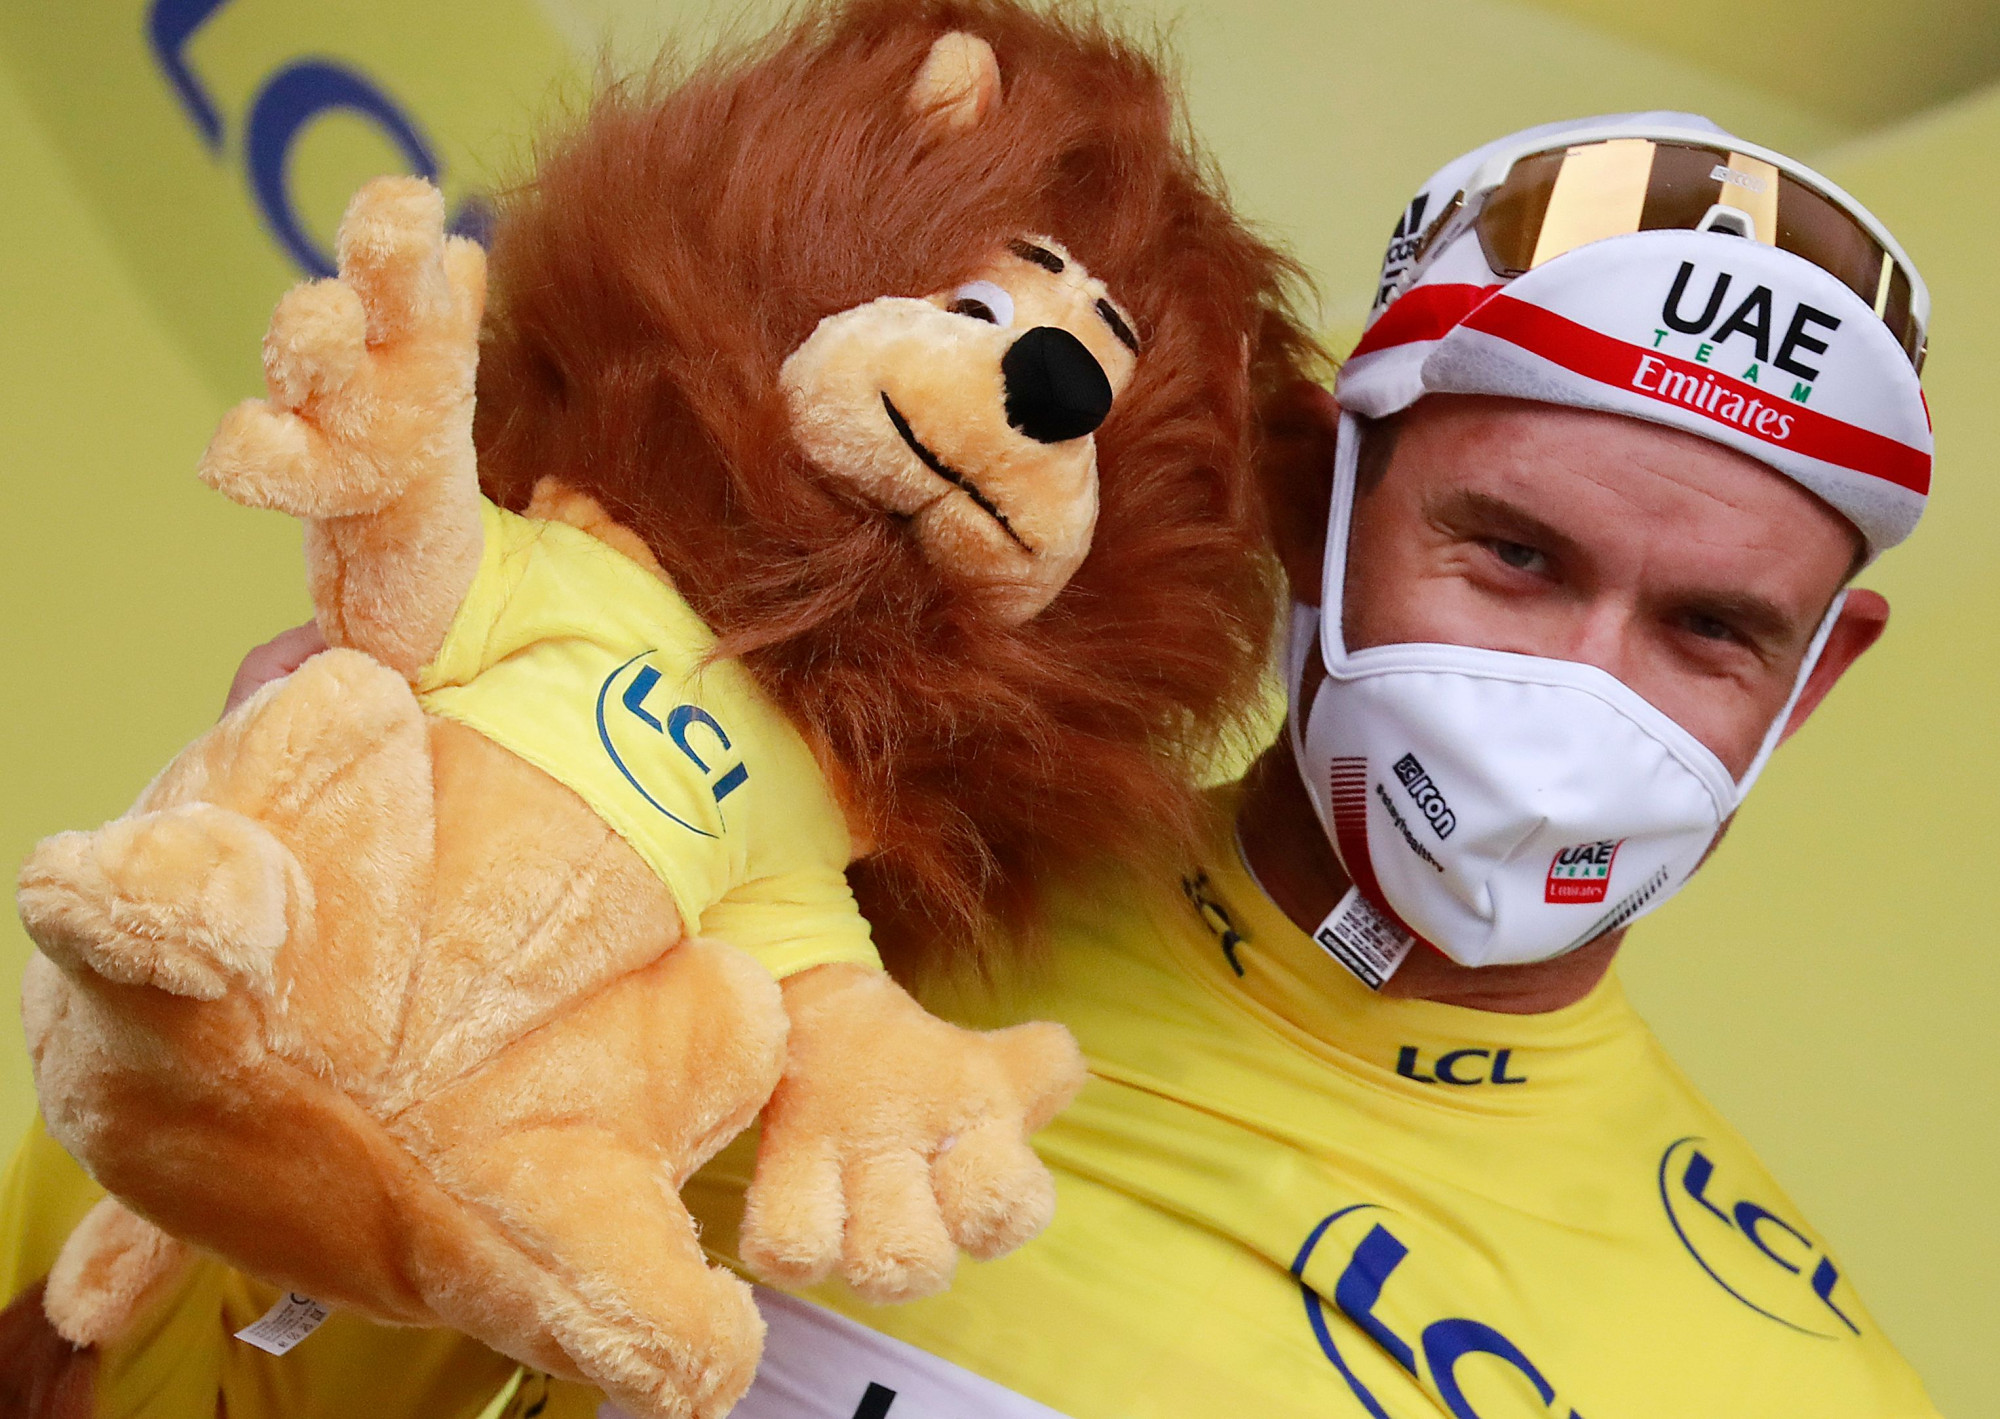 Norway’s Alexander Kristoff Recovers From Crash to Win Chaotic First Stage of Tour de France